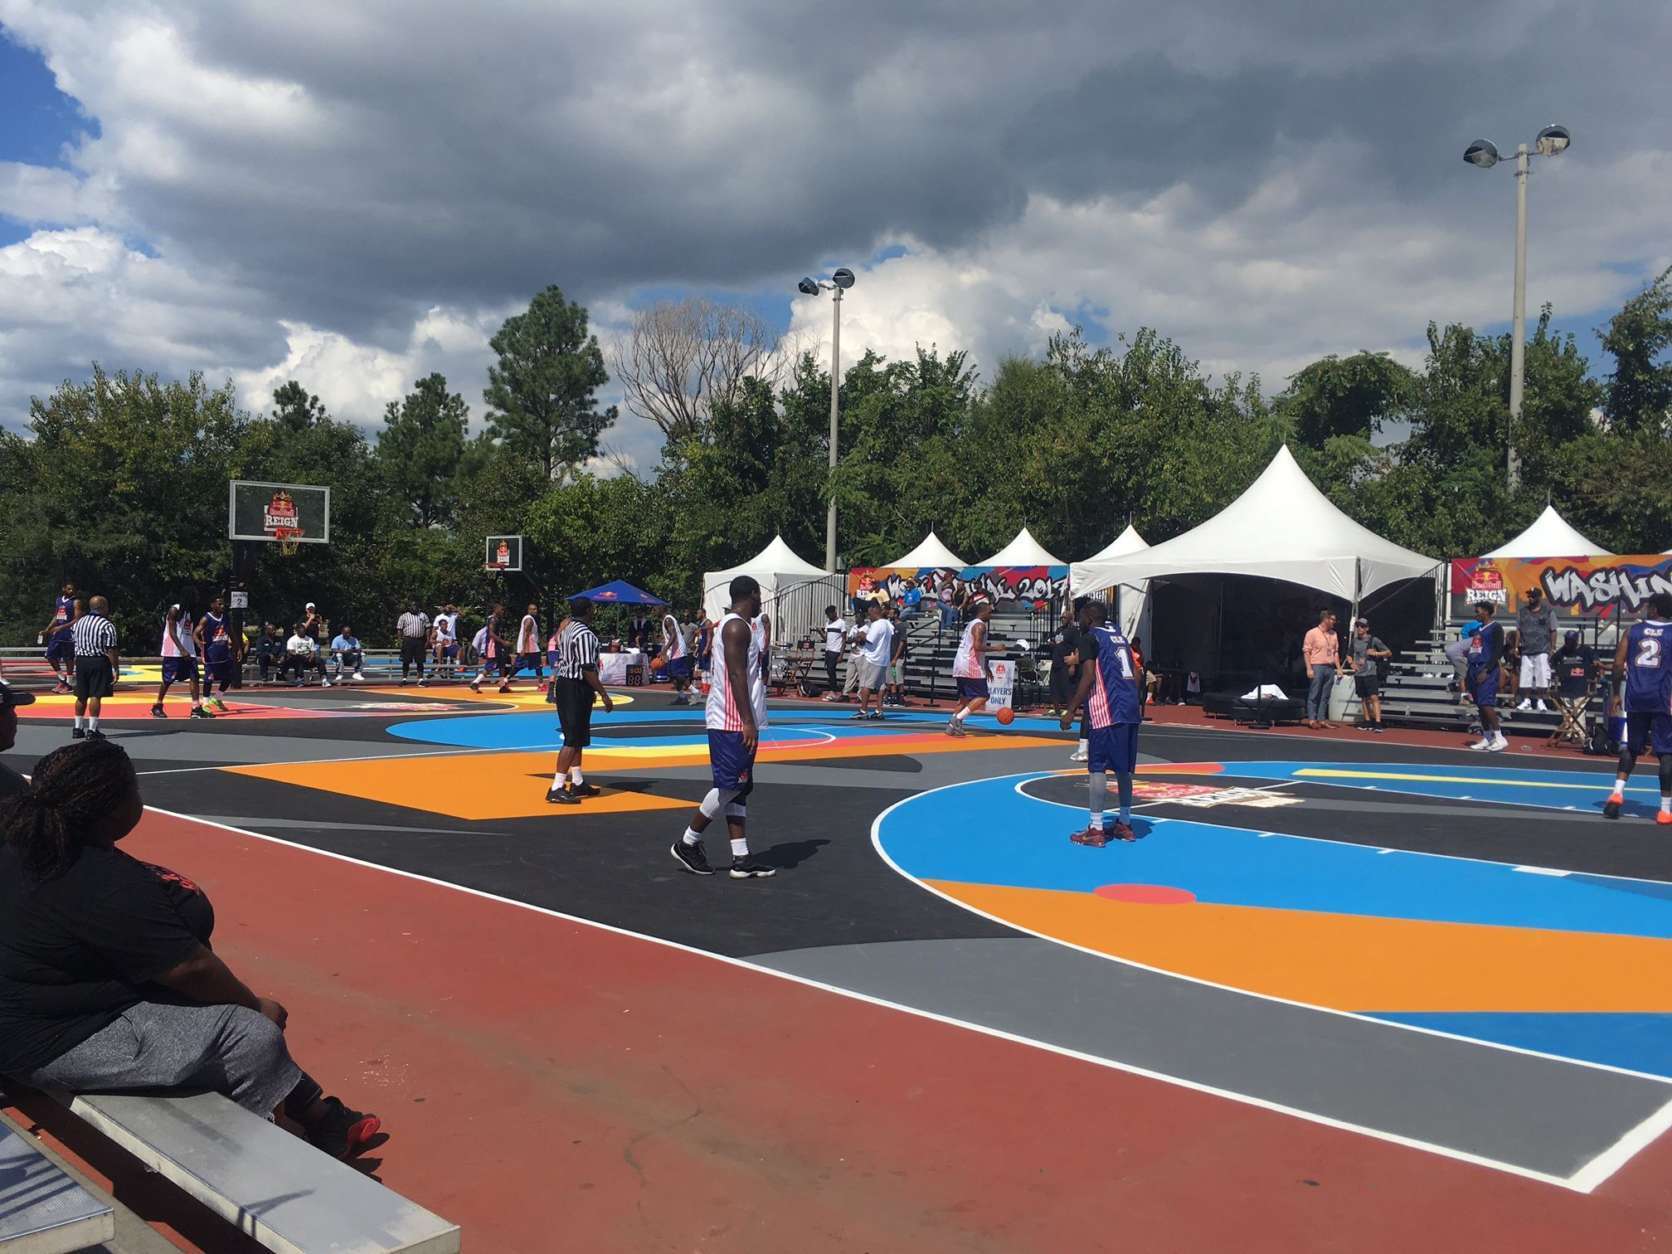 The court was renovated and redesigned by local artists No Kings Collective. (WTOP/Noah Frank)